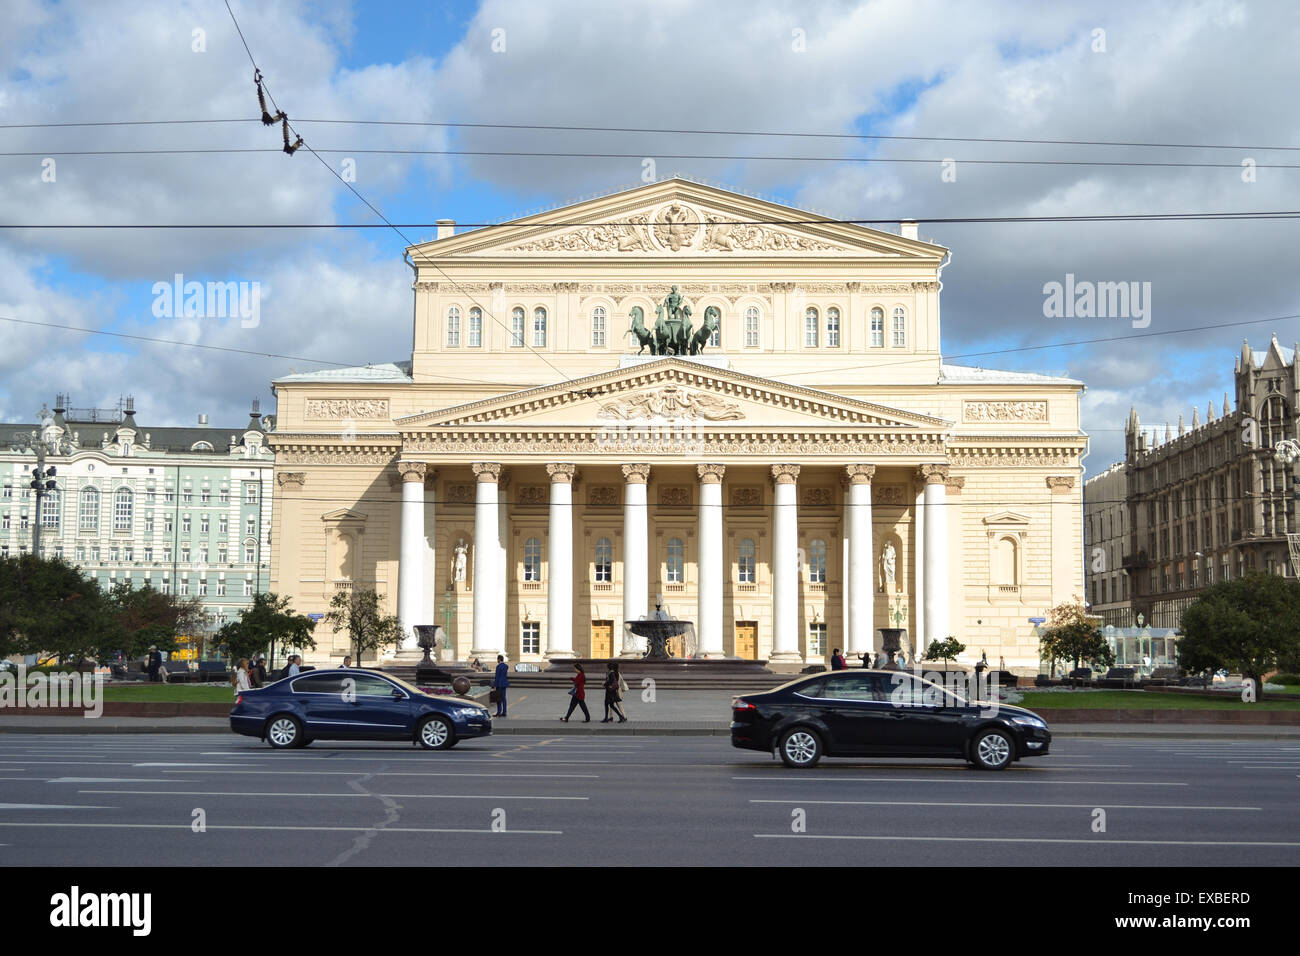 Road traffic passing in front of the Bolshoi theatre, Moscow, Russia Stock Photo